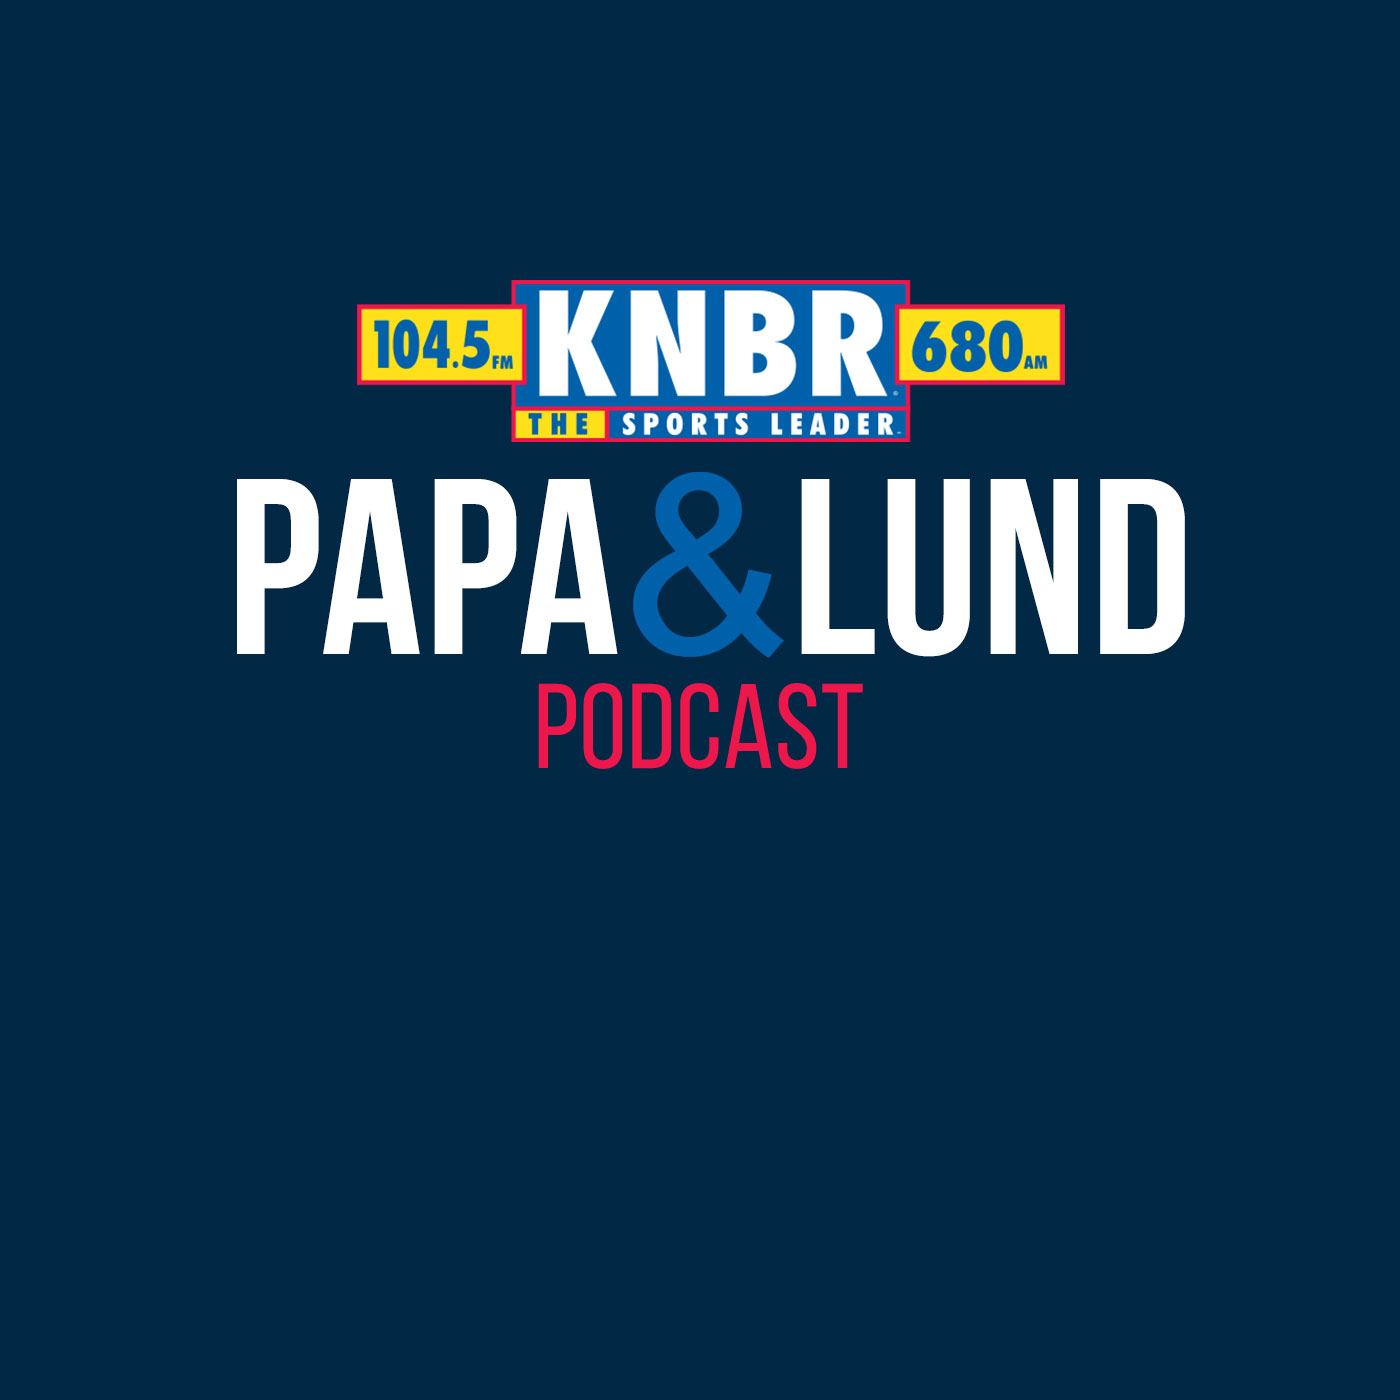 12-20 Mike Silver joins Papa & Lund to discuss the MVP debate with Brock Purdy and if it should be any debate at all